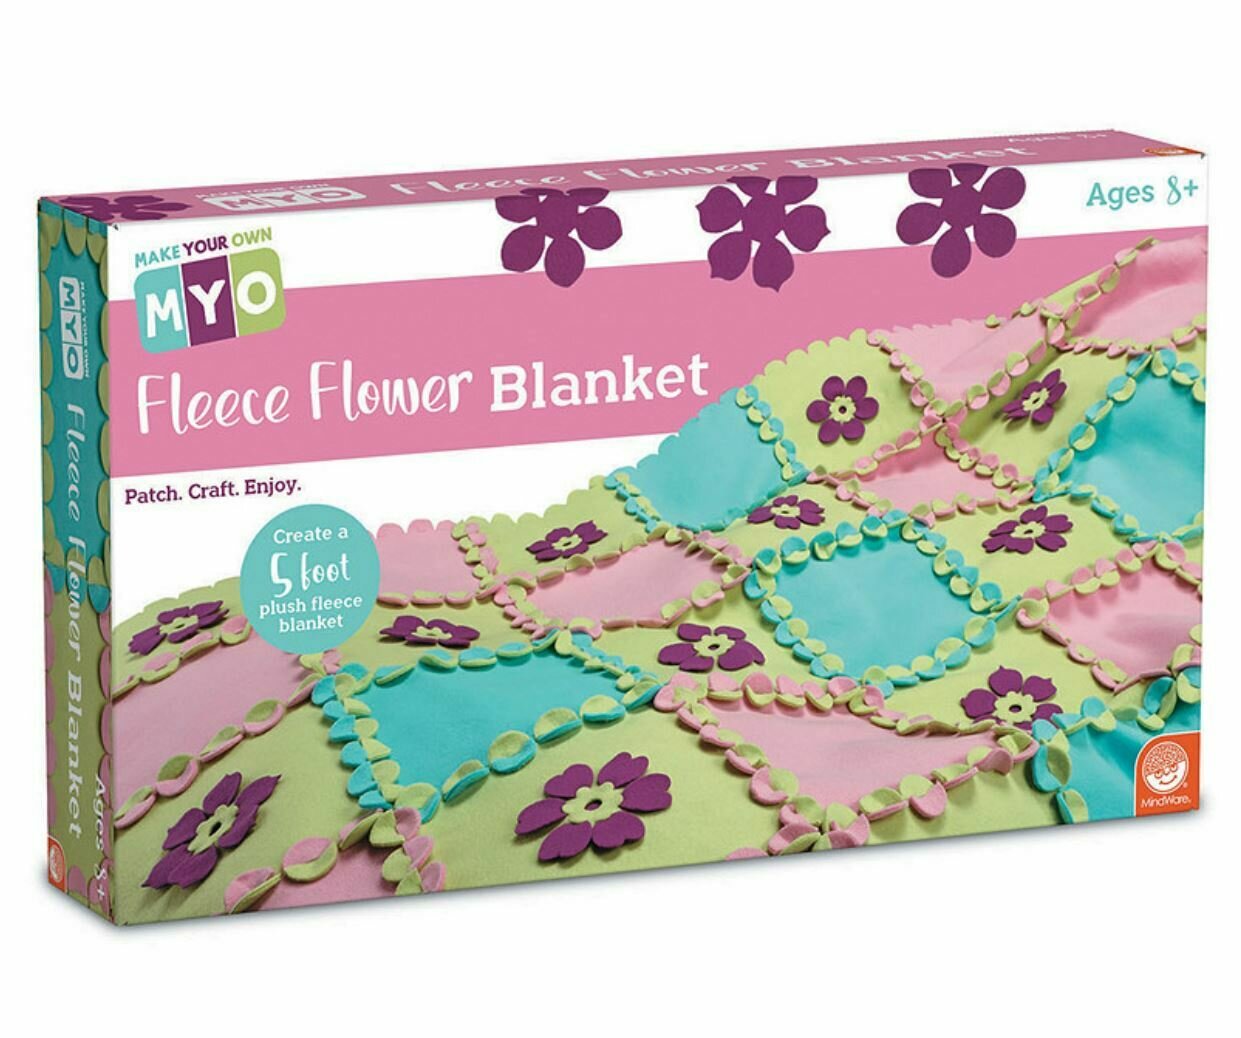 Make Your Own Craft Blanket